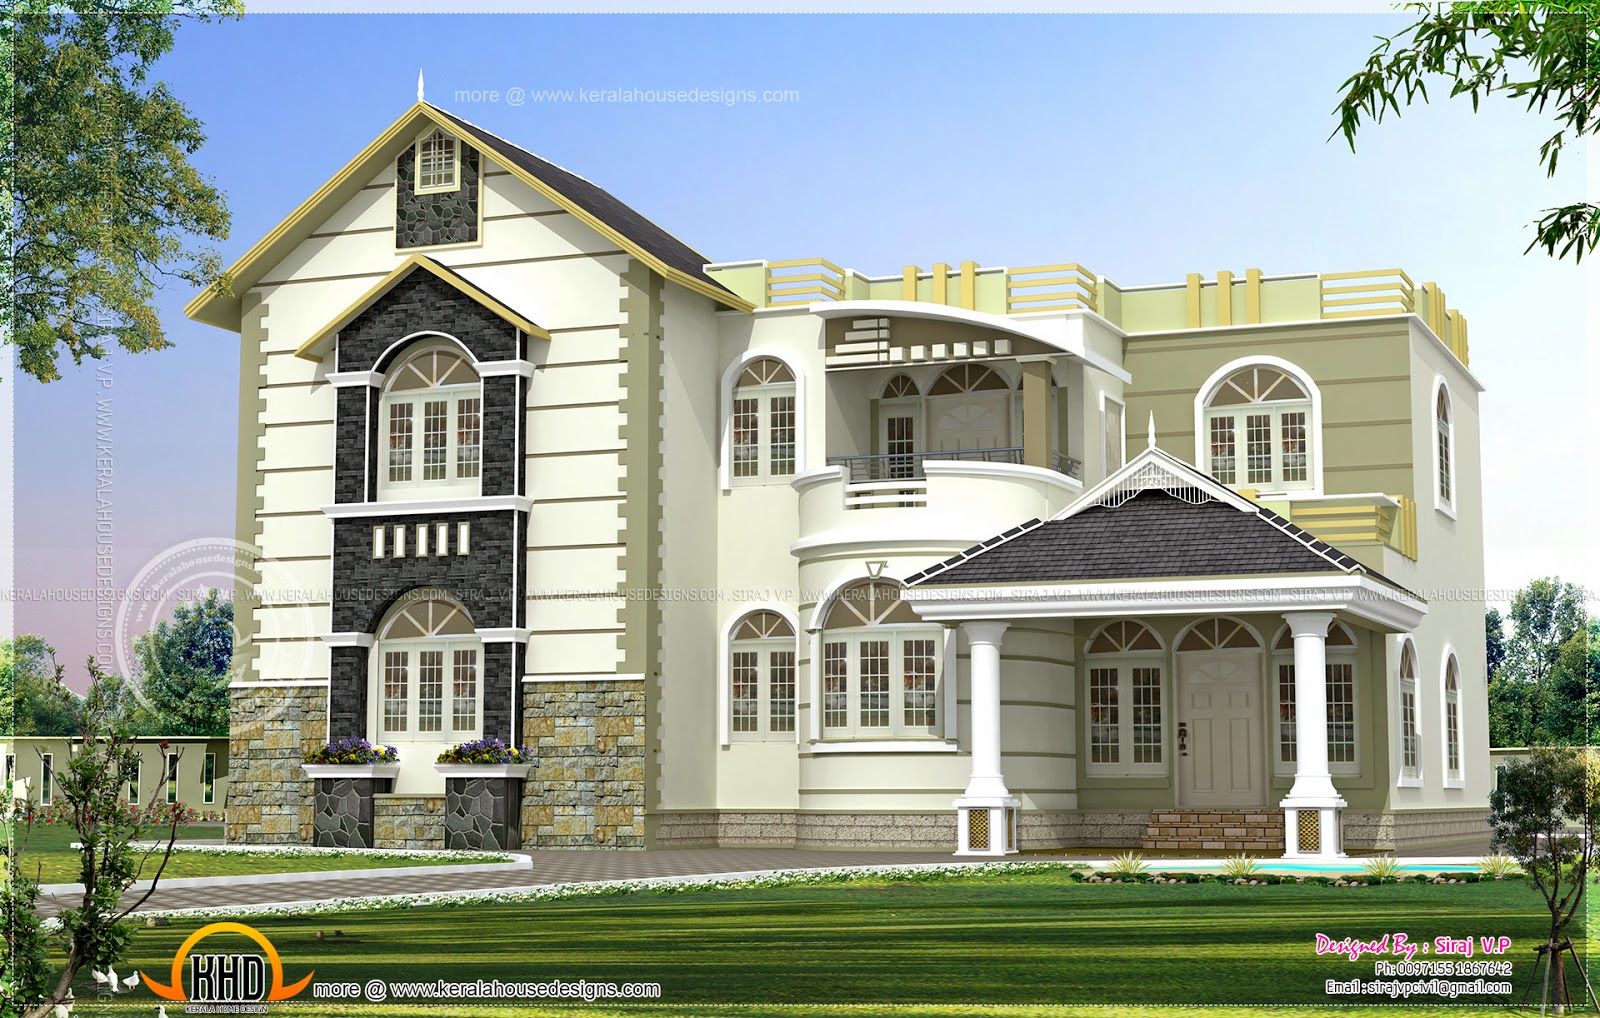 One house exterior design in two color combinations ...